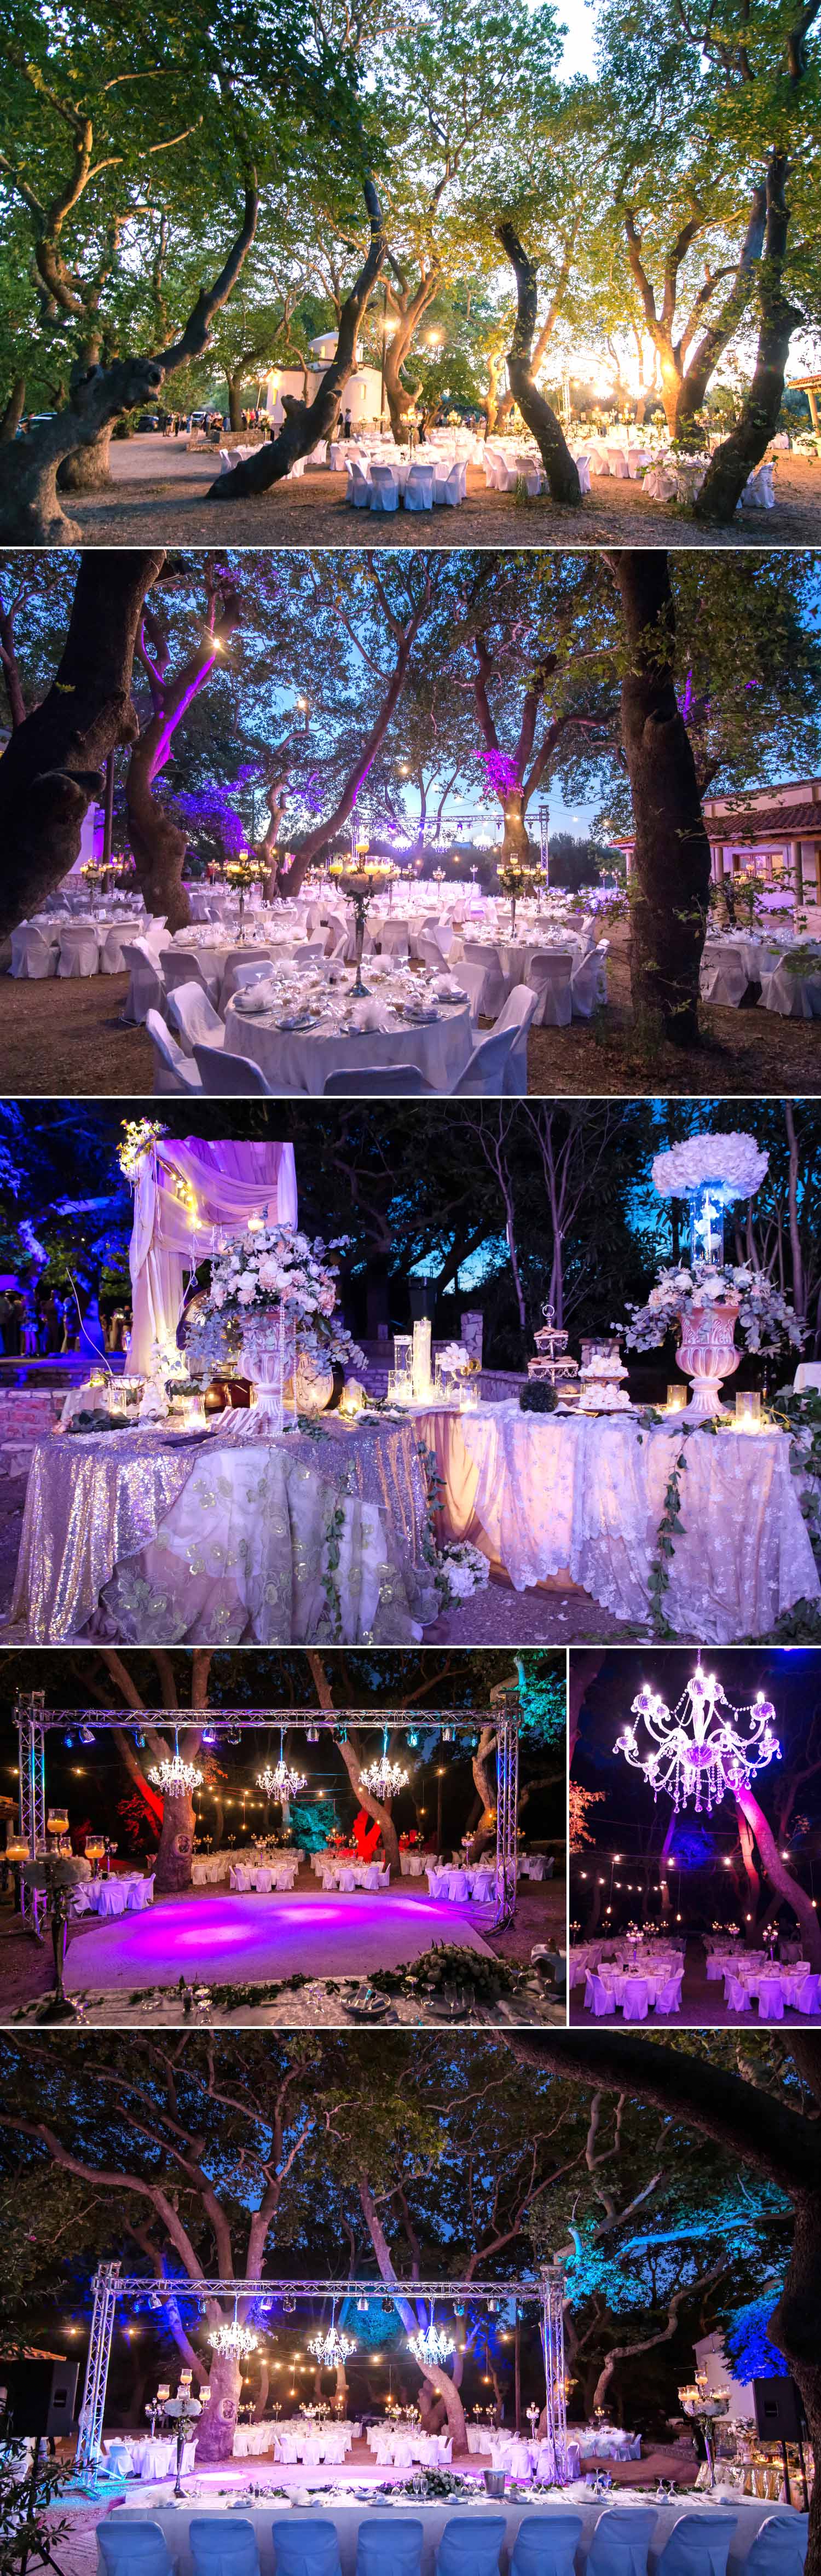 A-magical-wedding-in-a-forest-by-Diamond-Events-planning-company-07